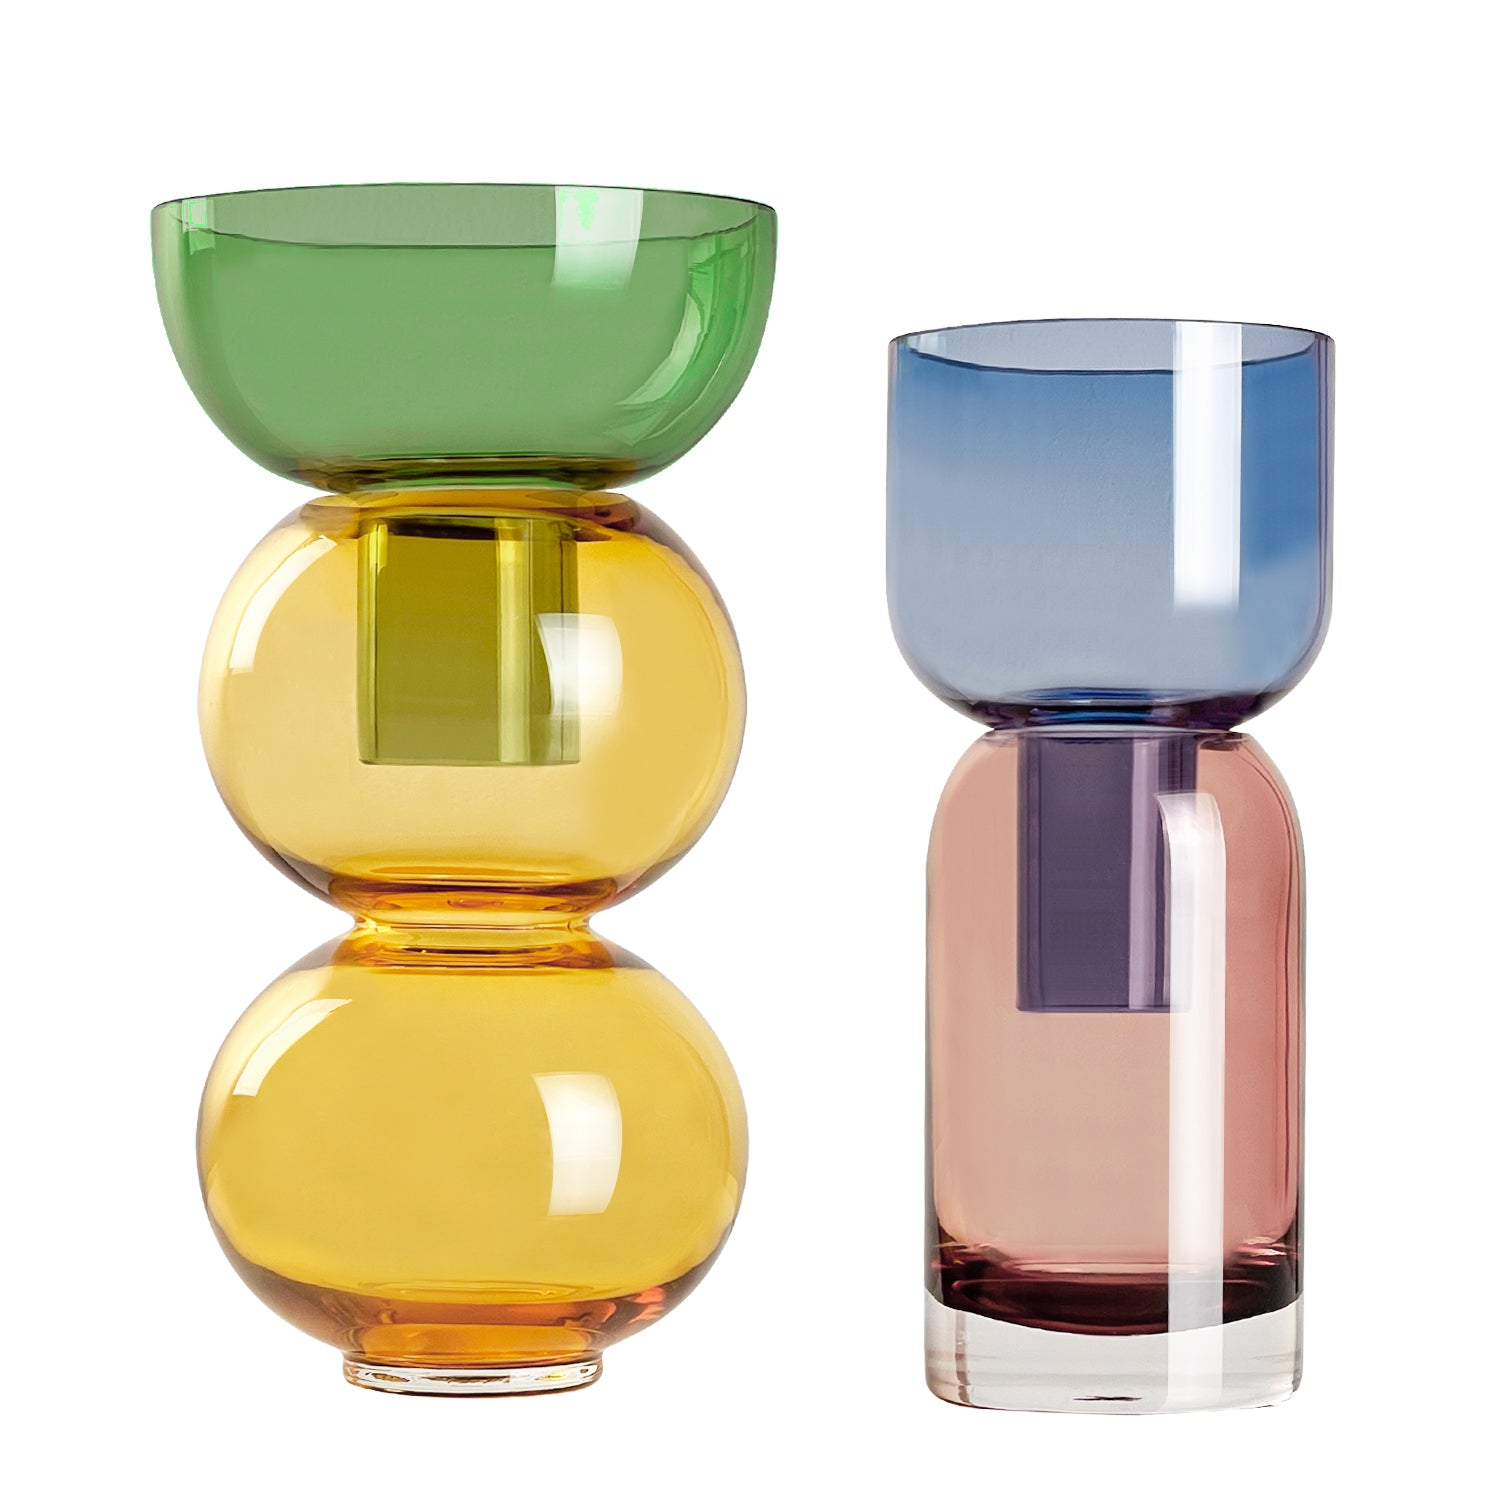 Cloudnola Fusion Lemon: Small Vases & Candle Holders Duo - Reversible and Multifunctional